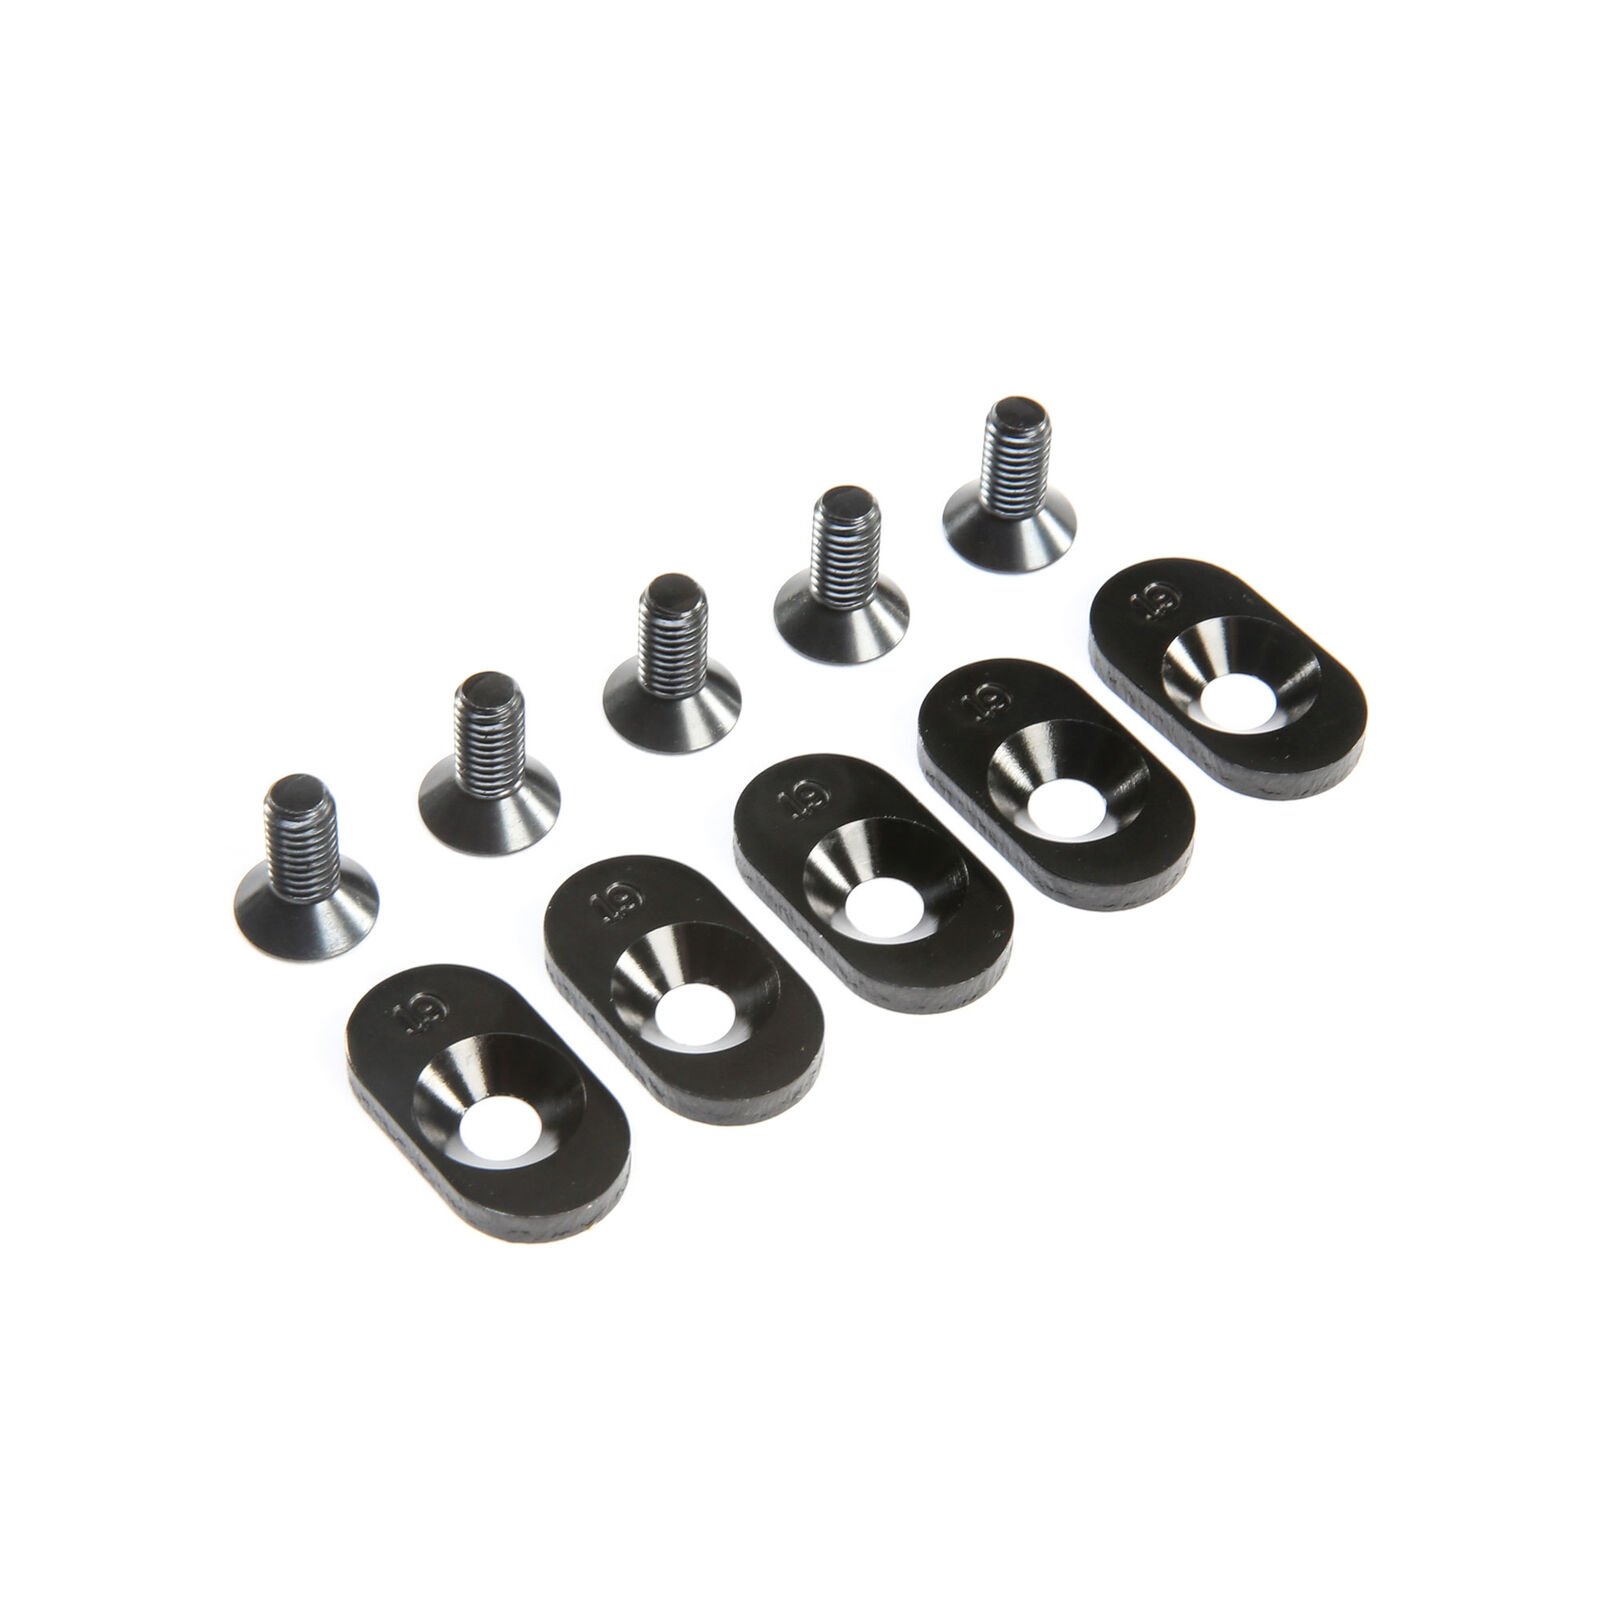 Engine Mount Insert and Screws 19T, Black (5): 5ive-T 2.0 (fits 62T spur)